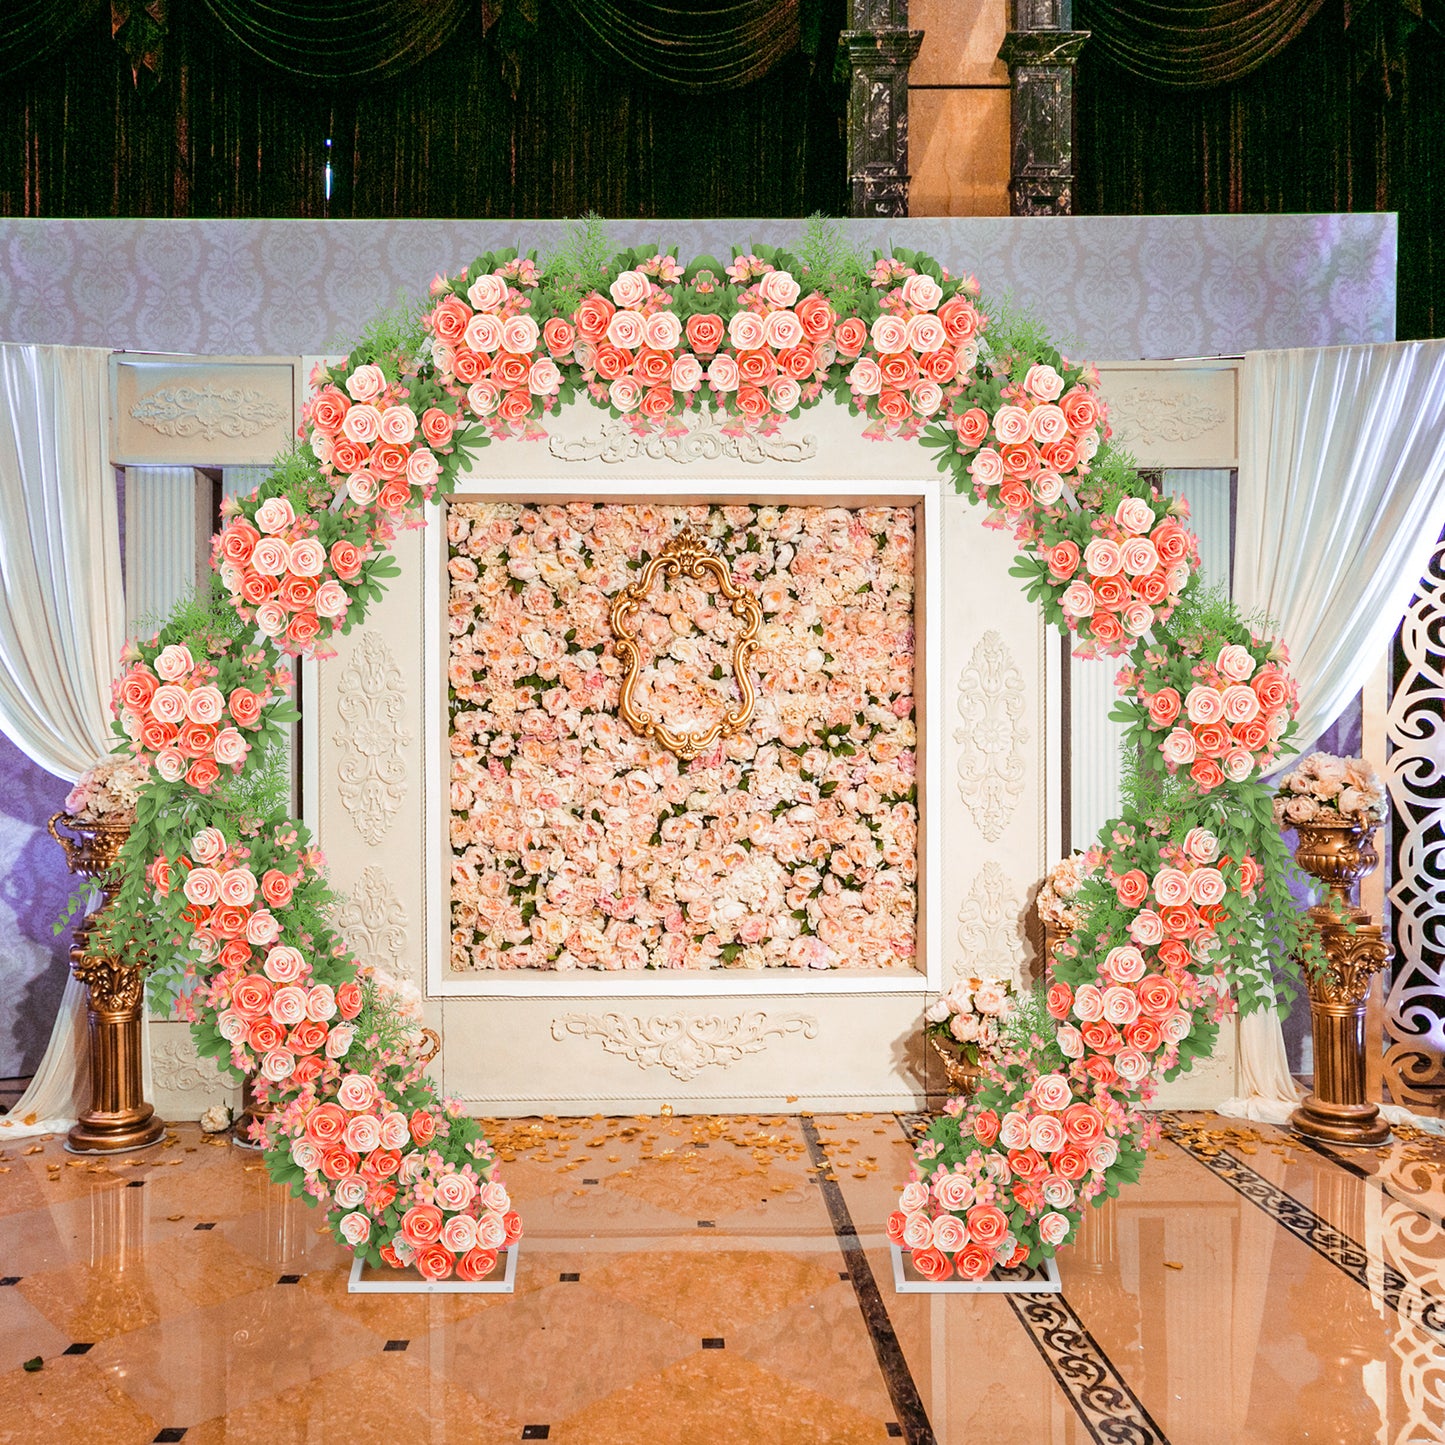 Metal Wedding Archway Backdrop Stand